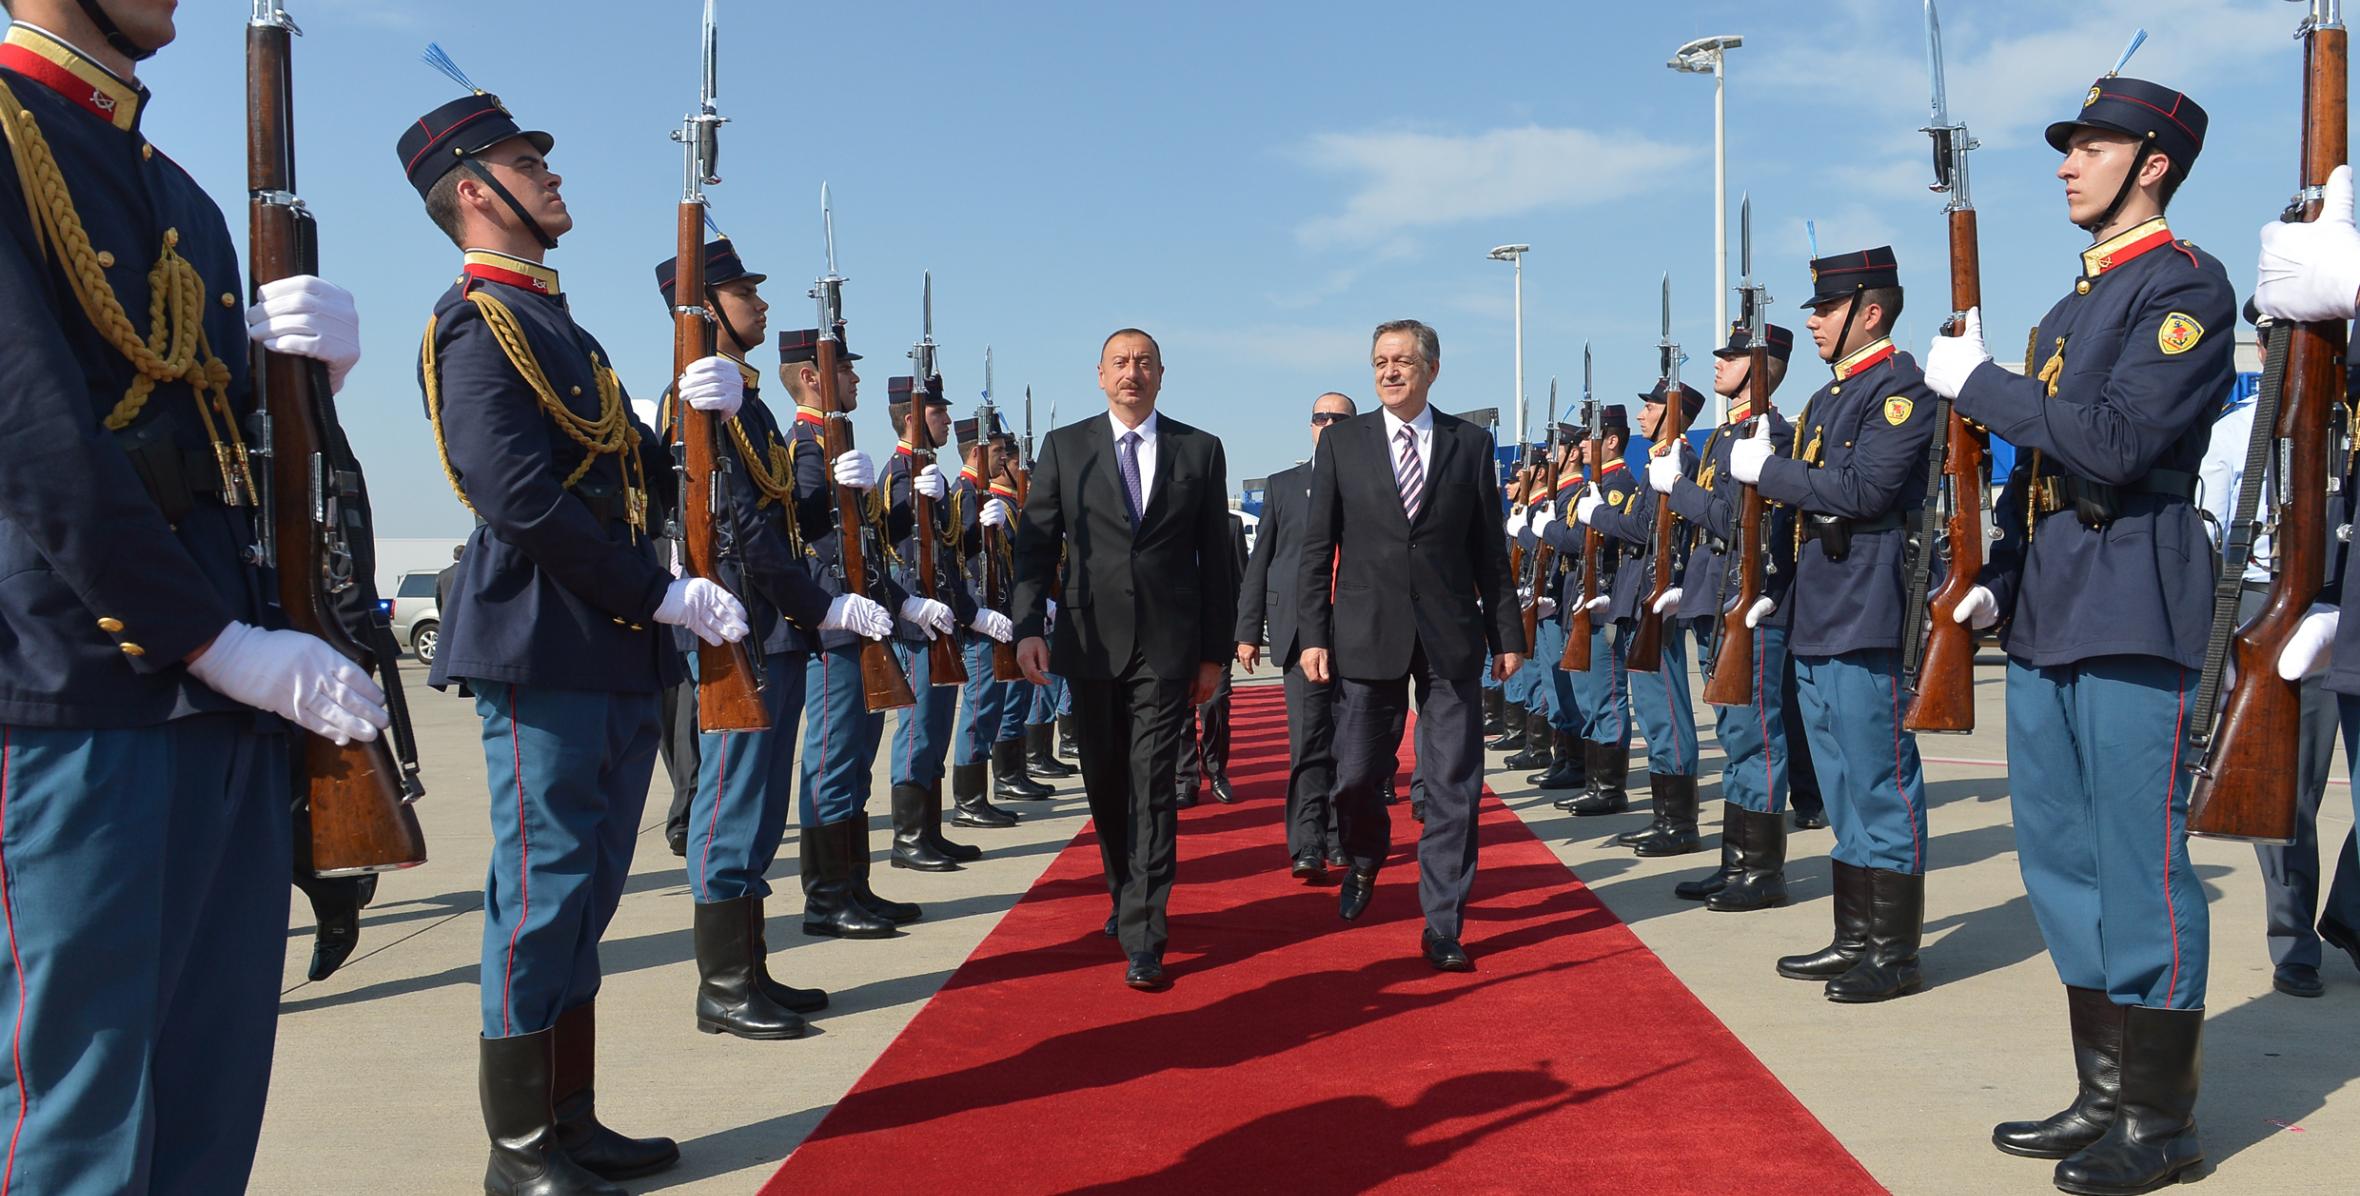 Ilham Aliyev’s state visit to Greece ended